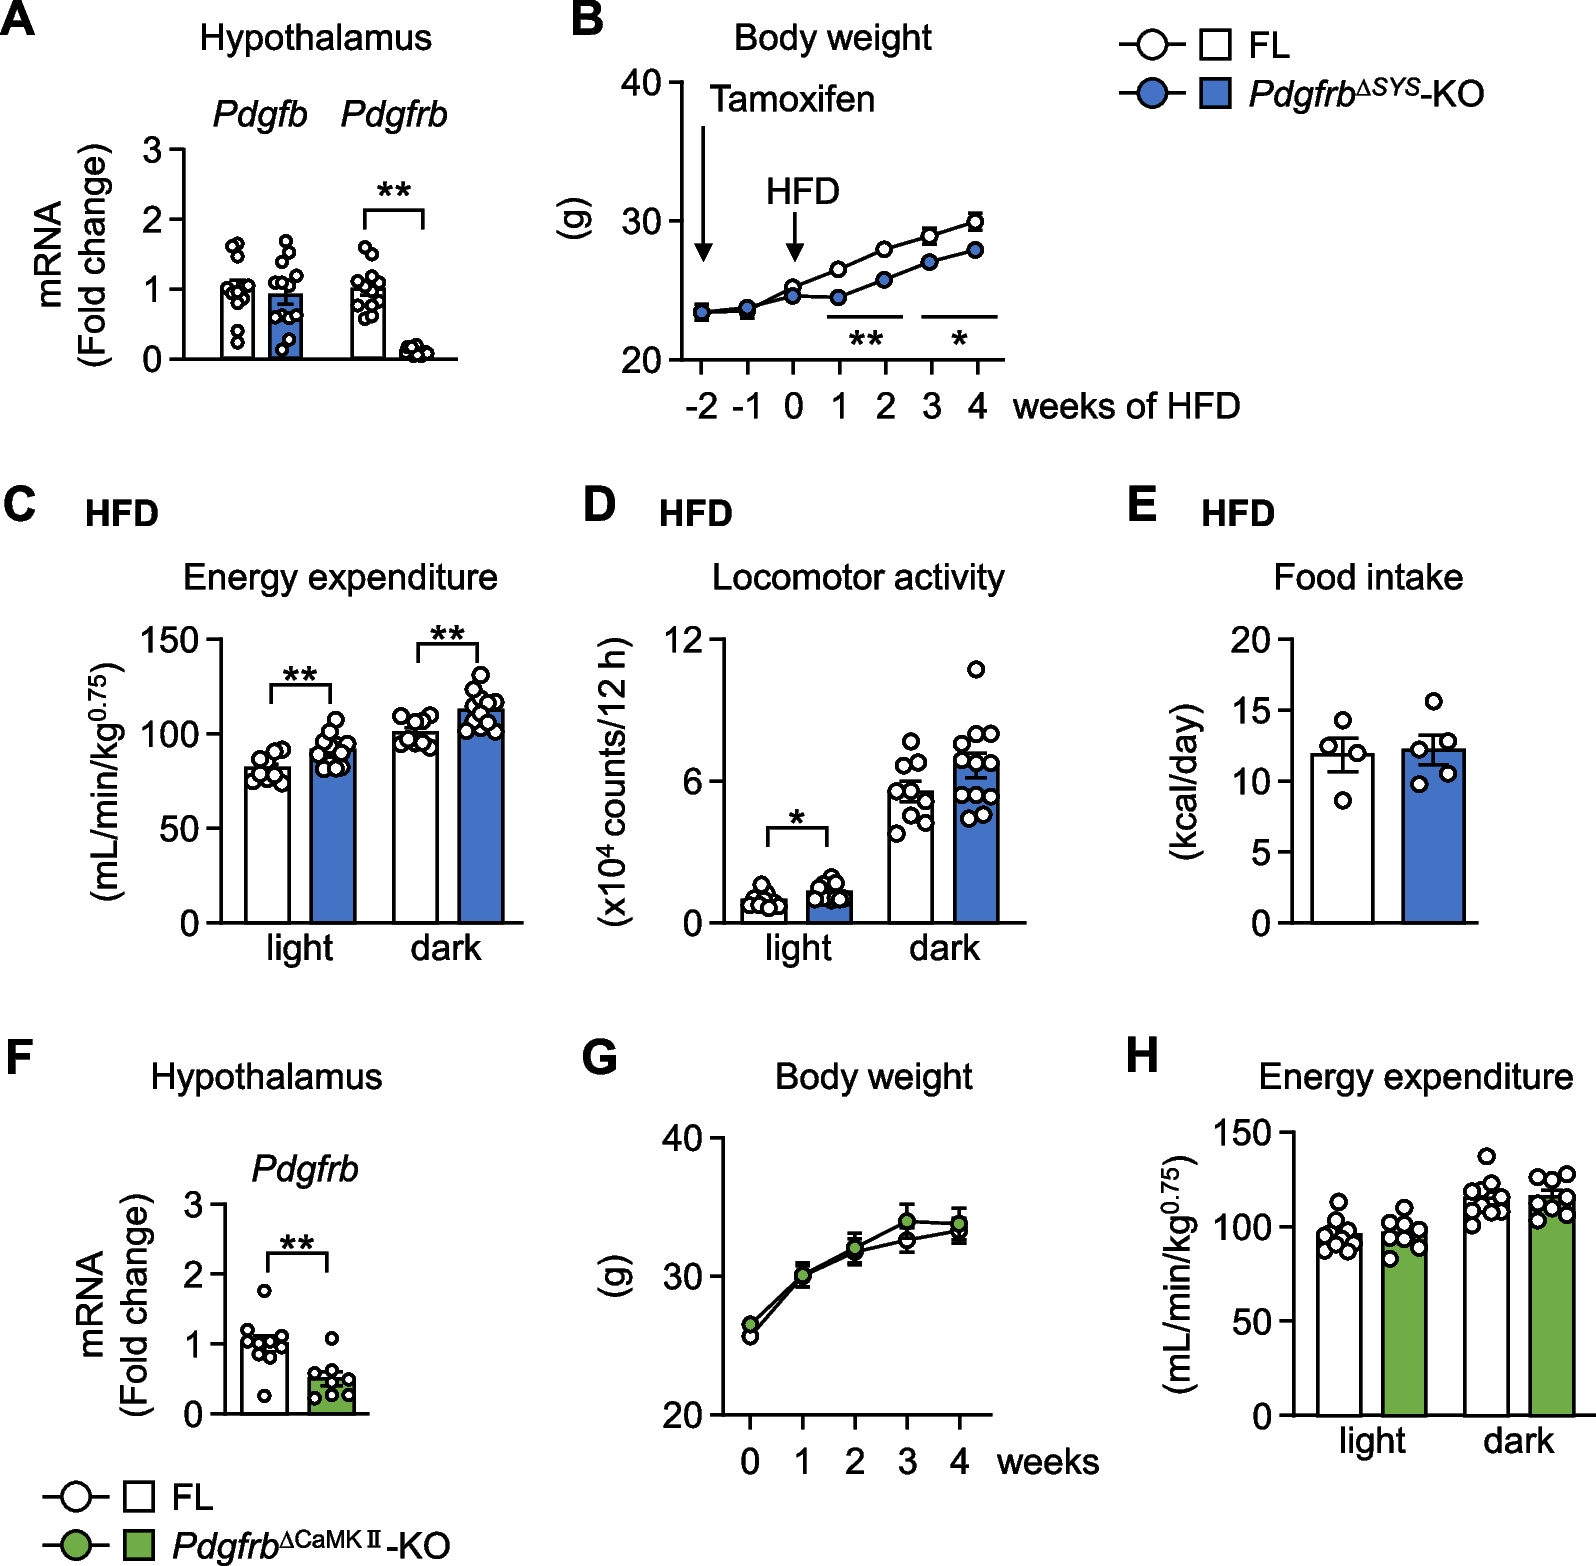 Platelet-derived growth factor signaling in pericytes promotes hypothalamic inflammation and obesity